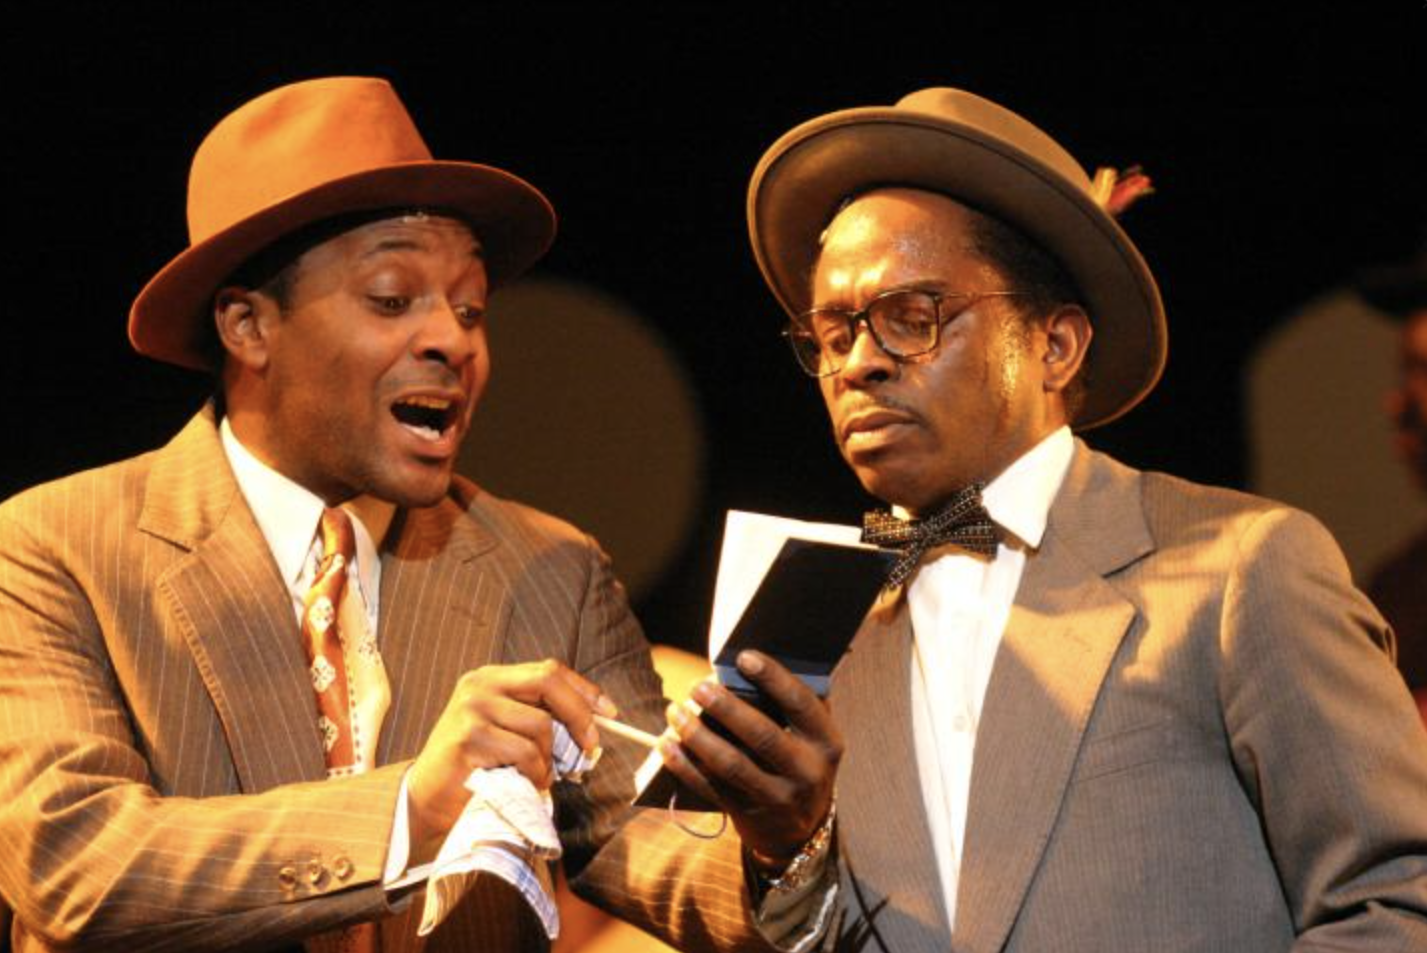 L-R: Neil Reidman and Victor Romero Evans in THE BIG LIFE by Paul Sirett, directed by Clint Dyer, 2004